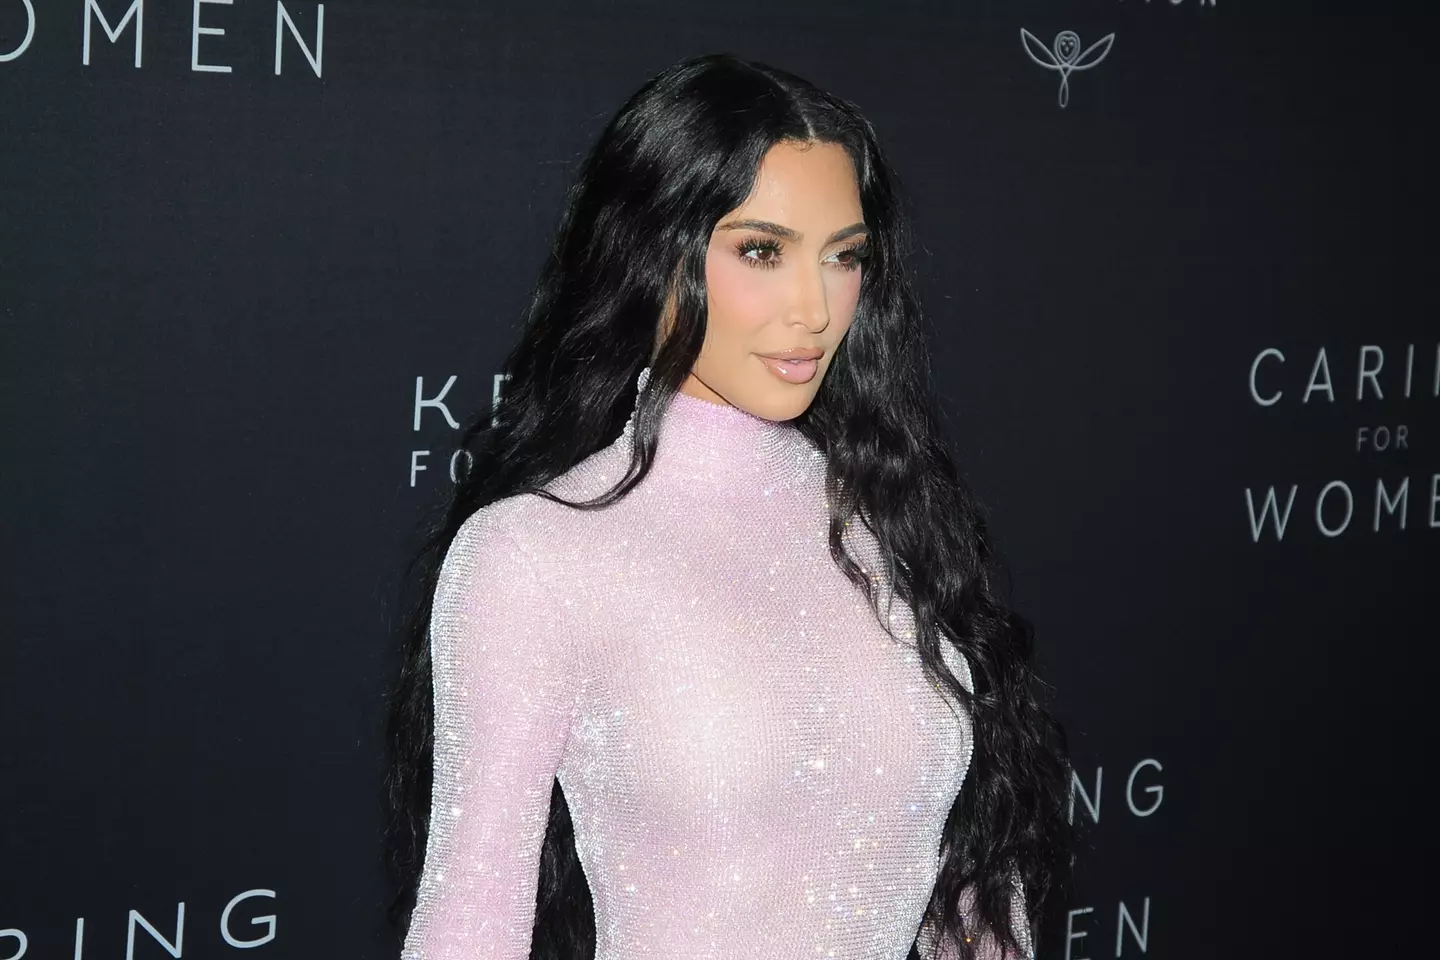 Kim Kardashian is a cult favorite among the celebrity obsessed.